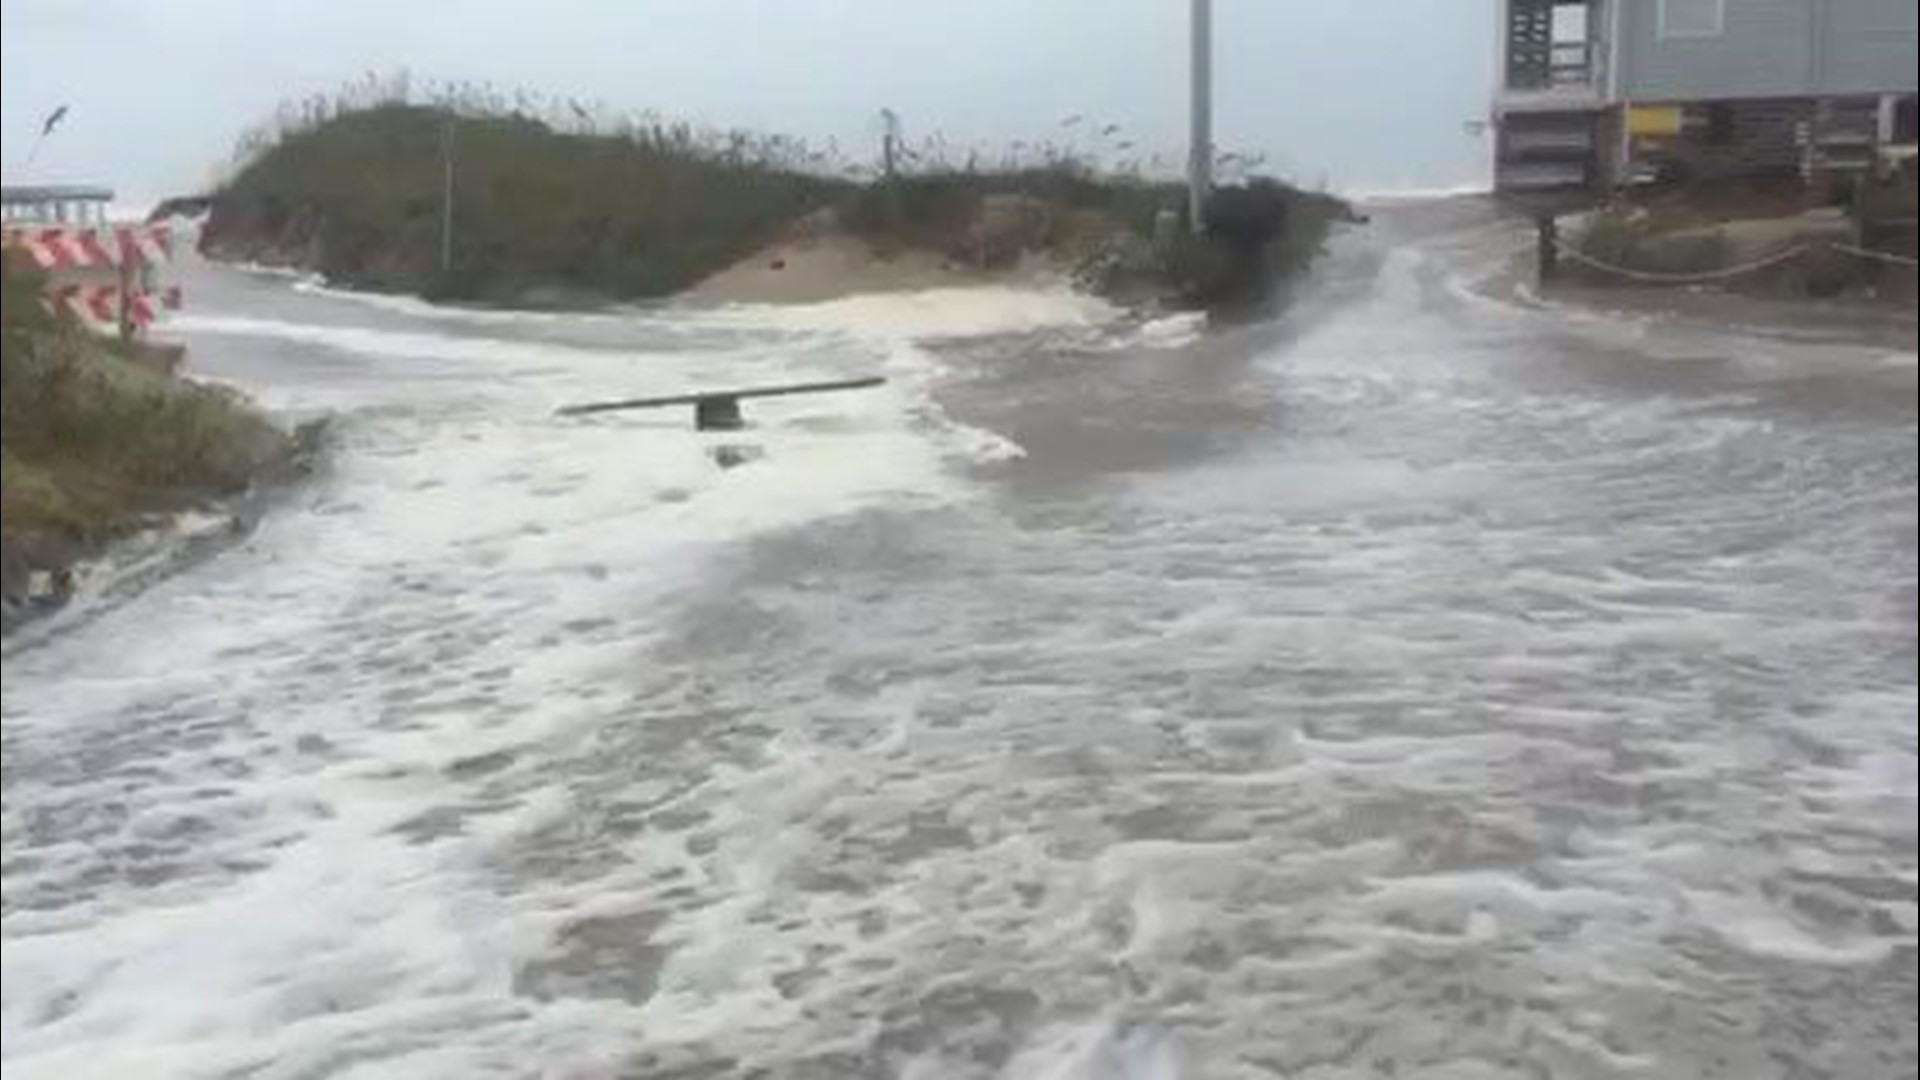 Water pours across and Down Seabreeze Drive in Kinnakeet, N.C. (south of Rodanthe) on September 13, 2018. Video courtesy Tim Fitch